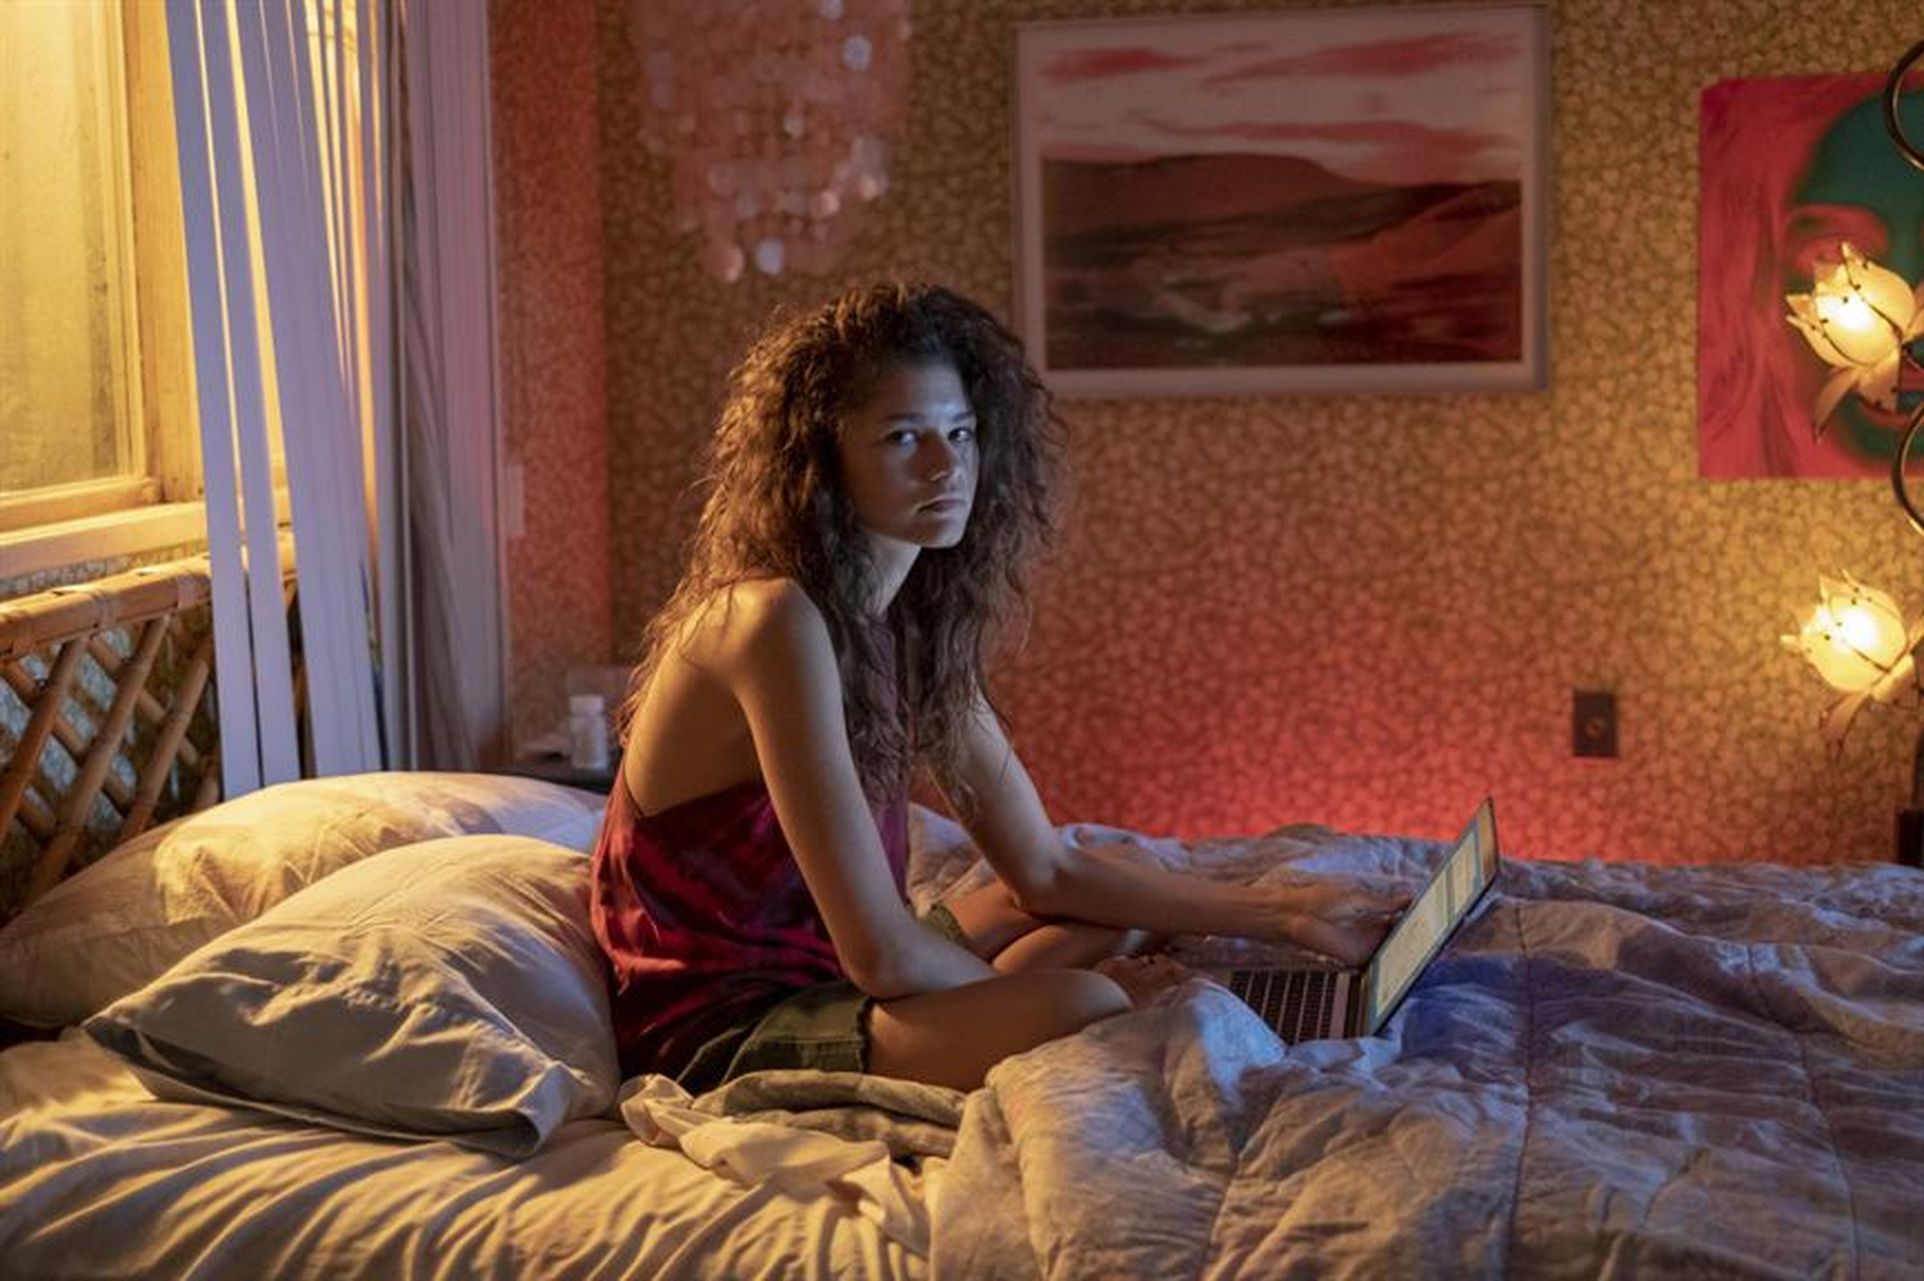 Drugs, depression, harassment: the series "Euphoria" launches a hotline to help its fans